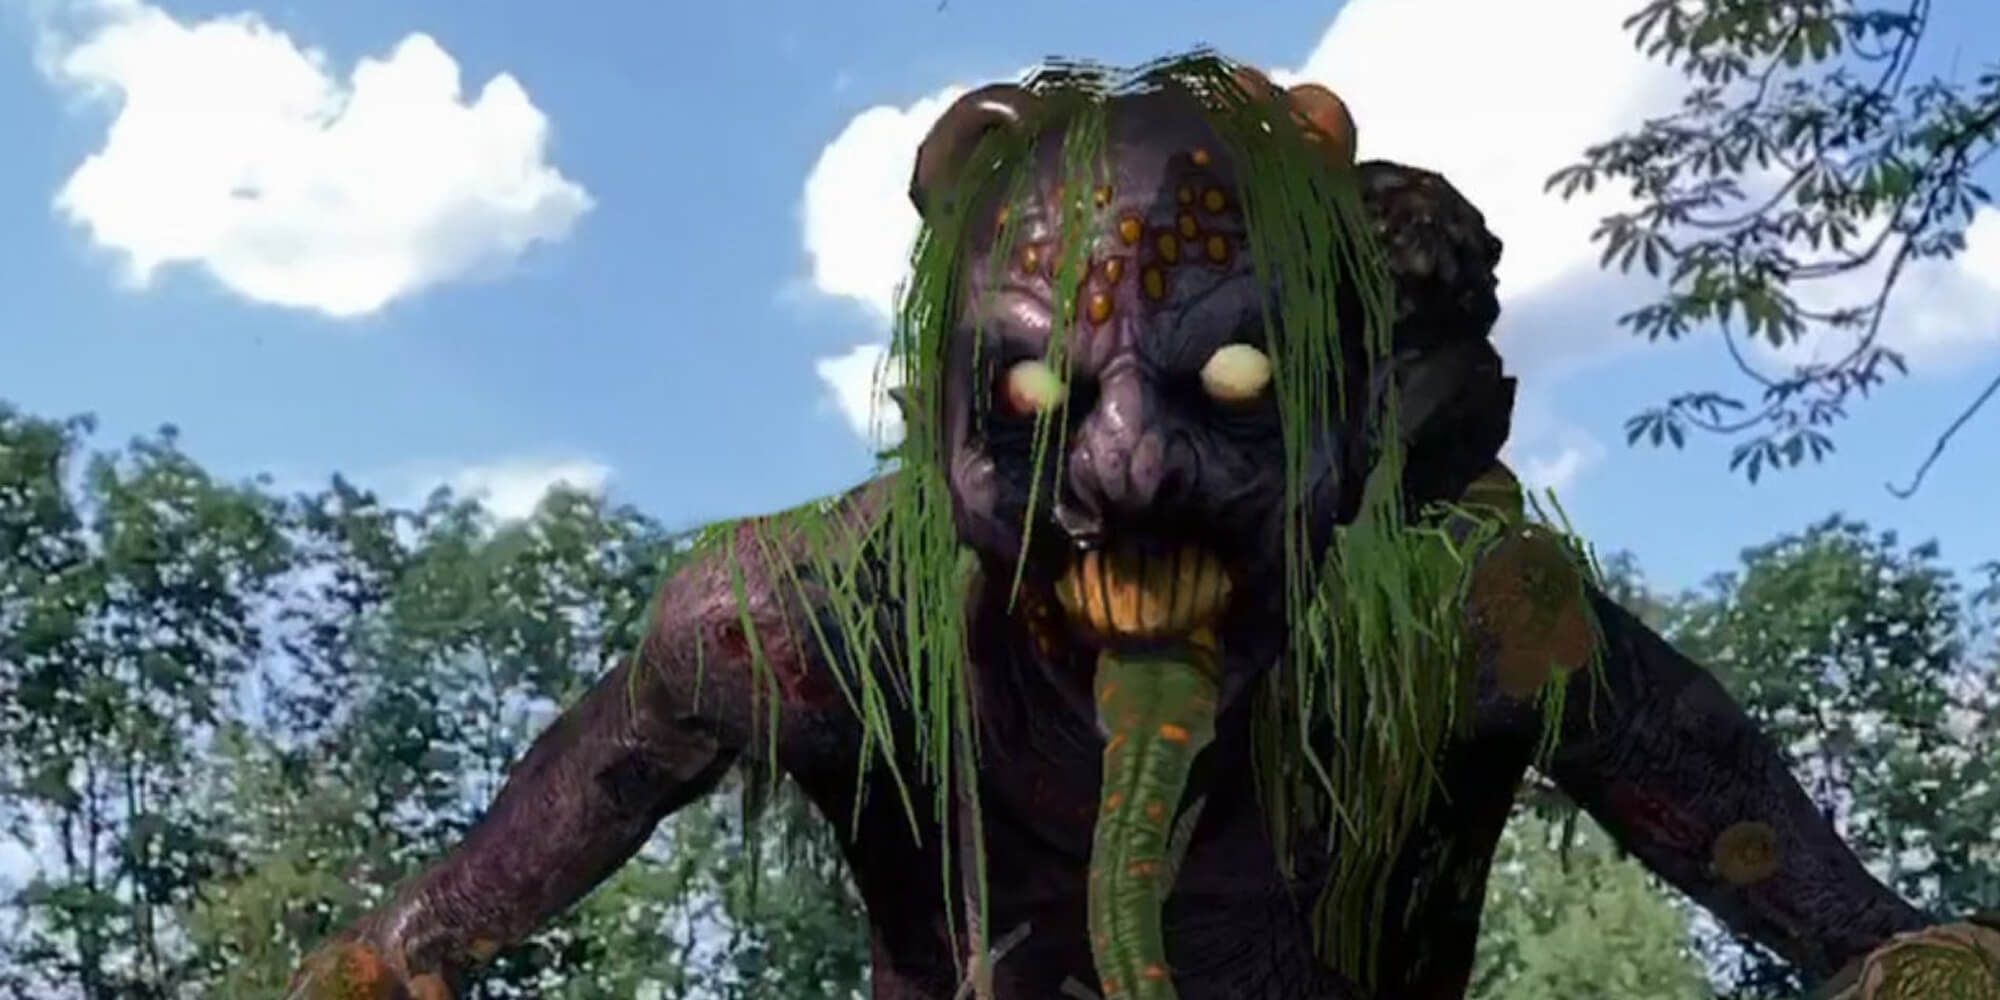 Close-Up Of A Swamp Monster